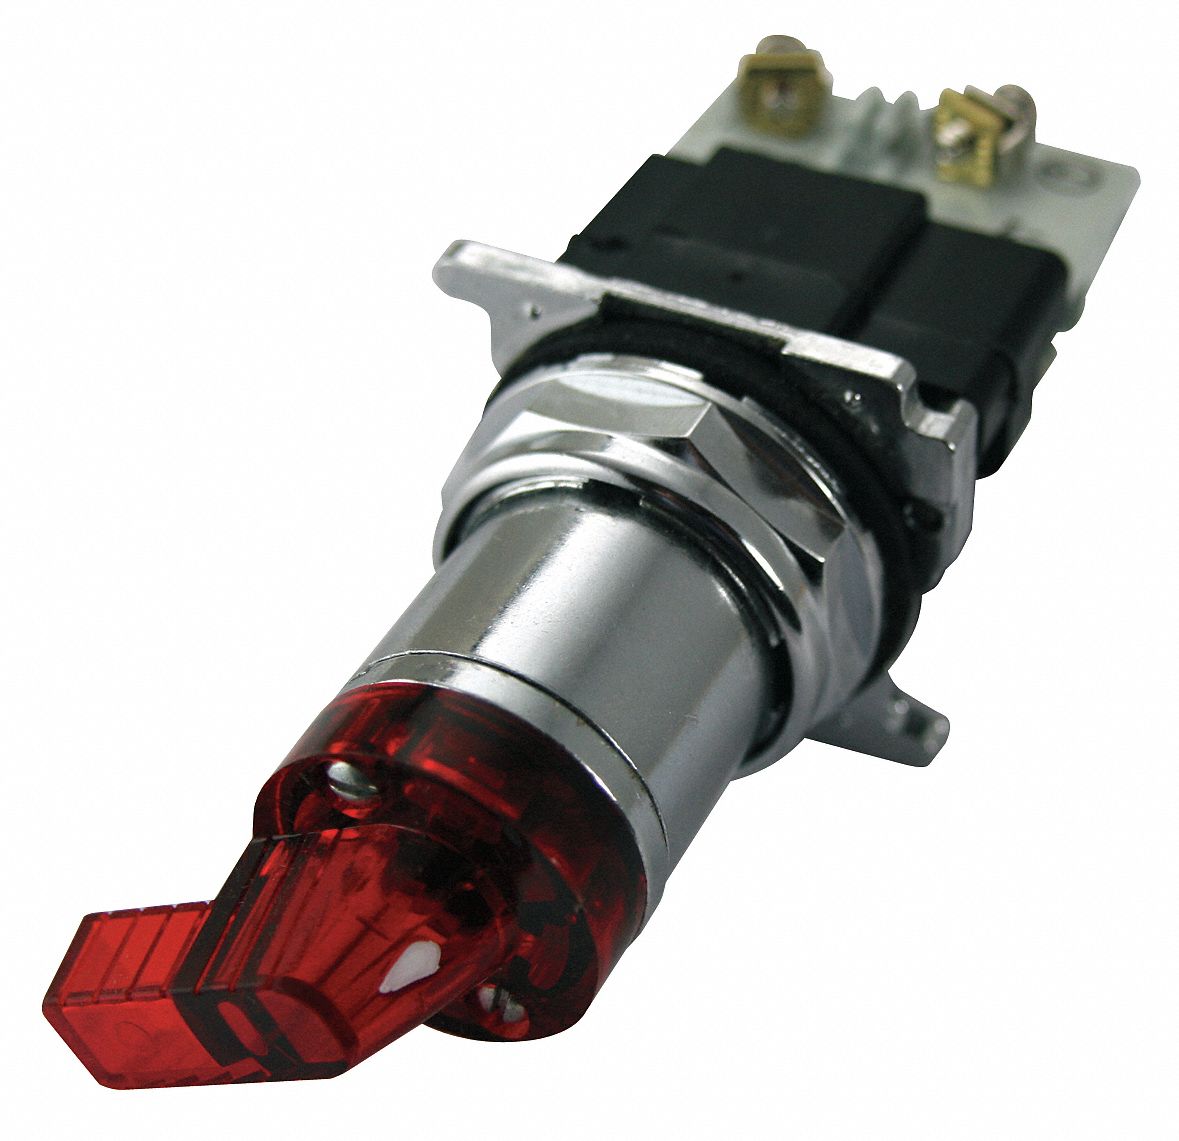 30mm Illuminated Selector Switch, Maintained / Maintained Action, 1NO/1NC Contact Form